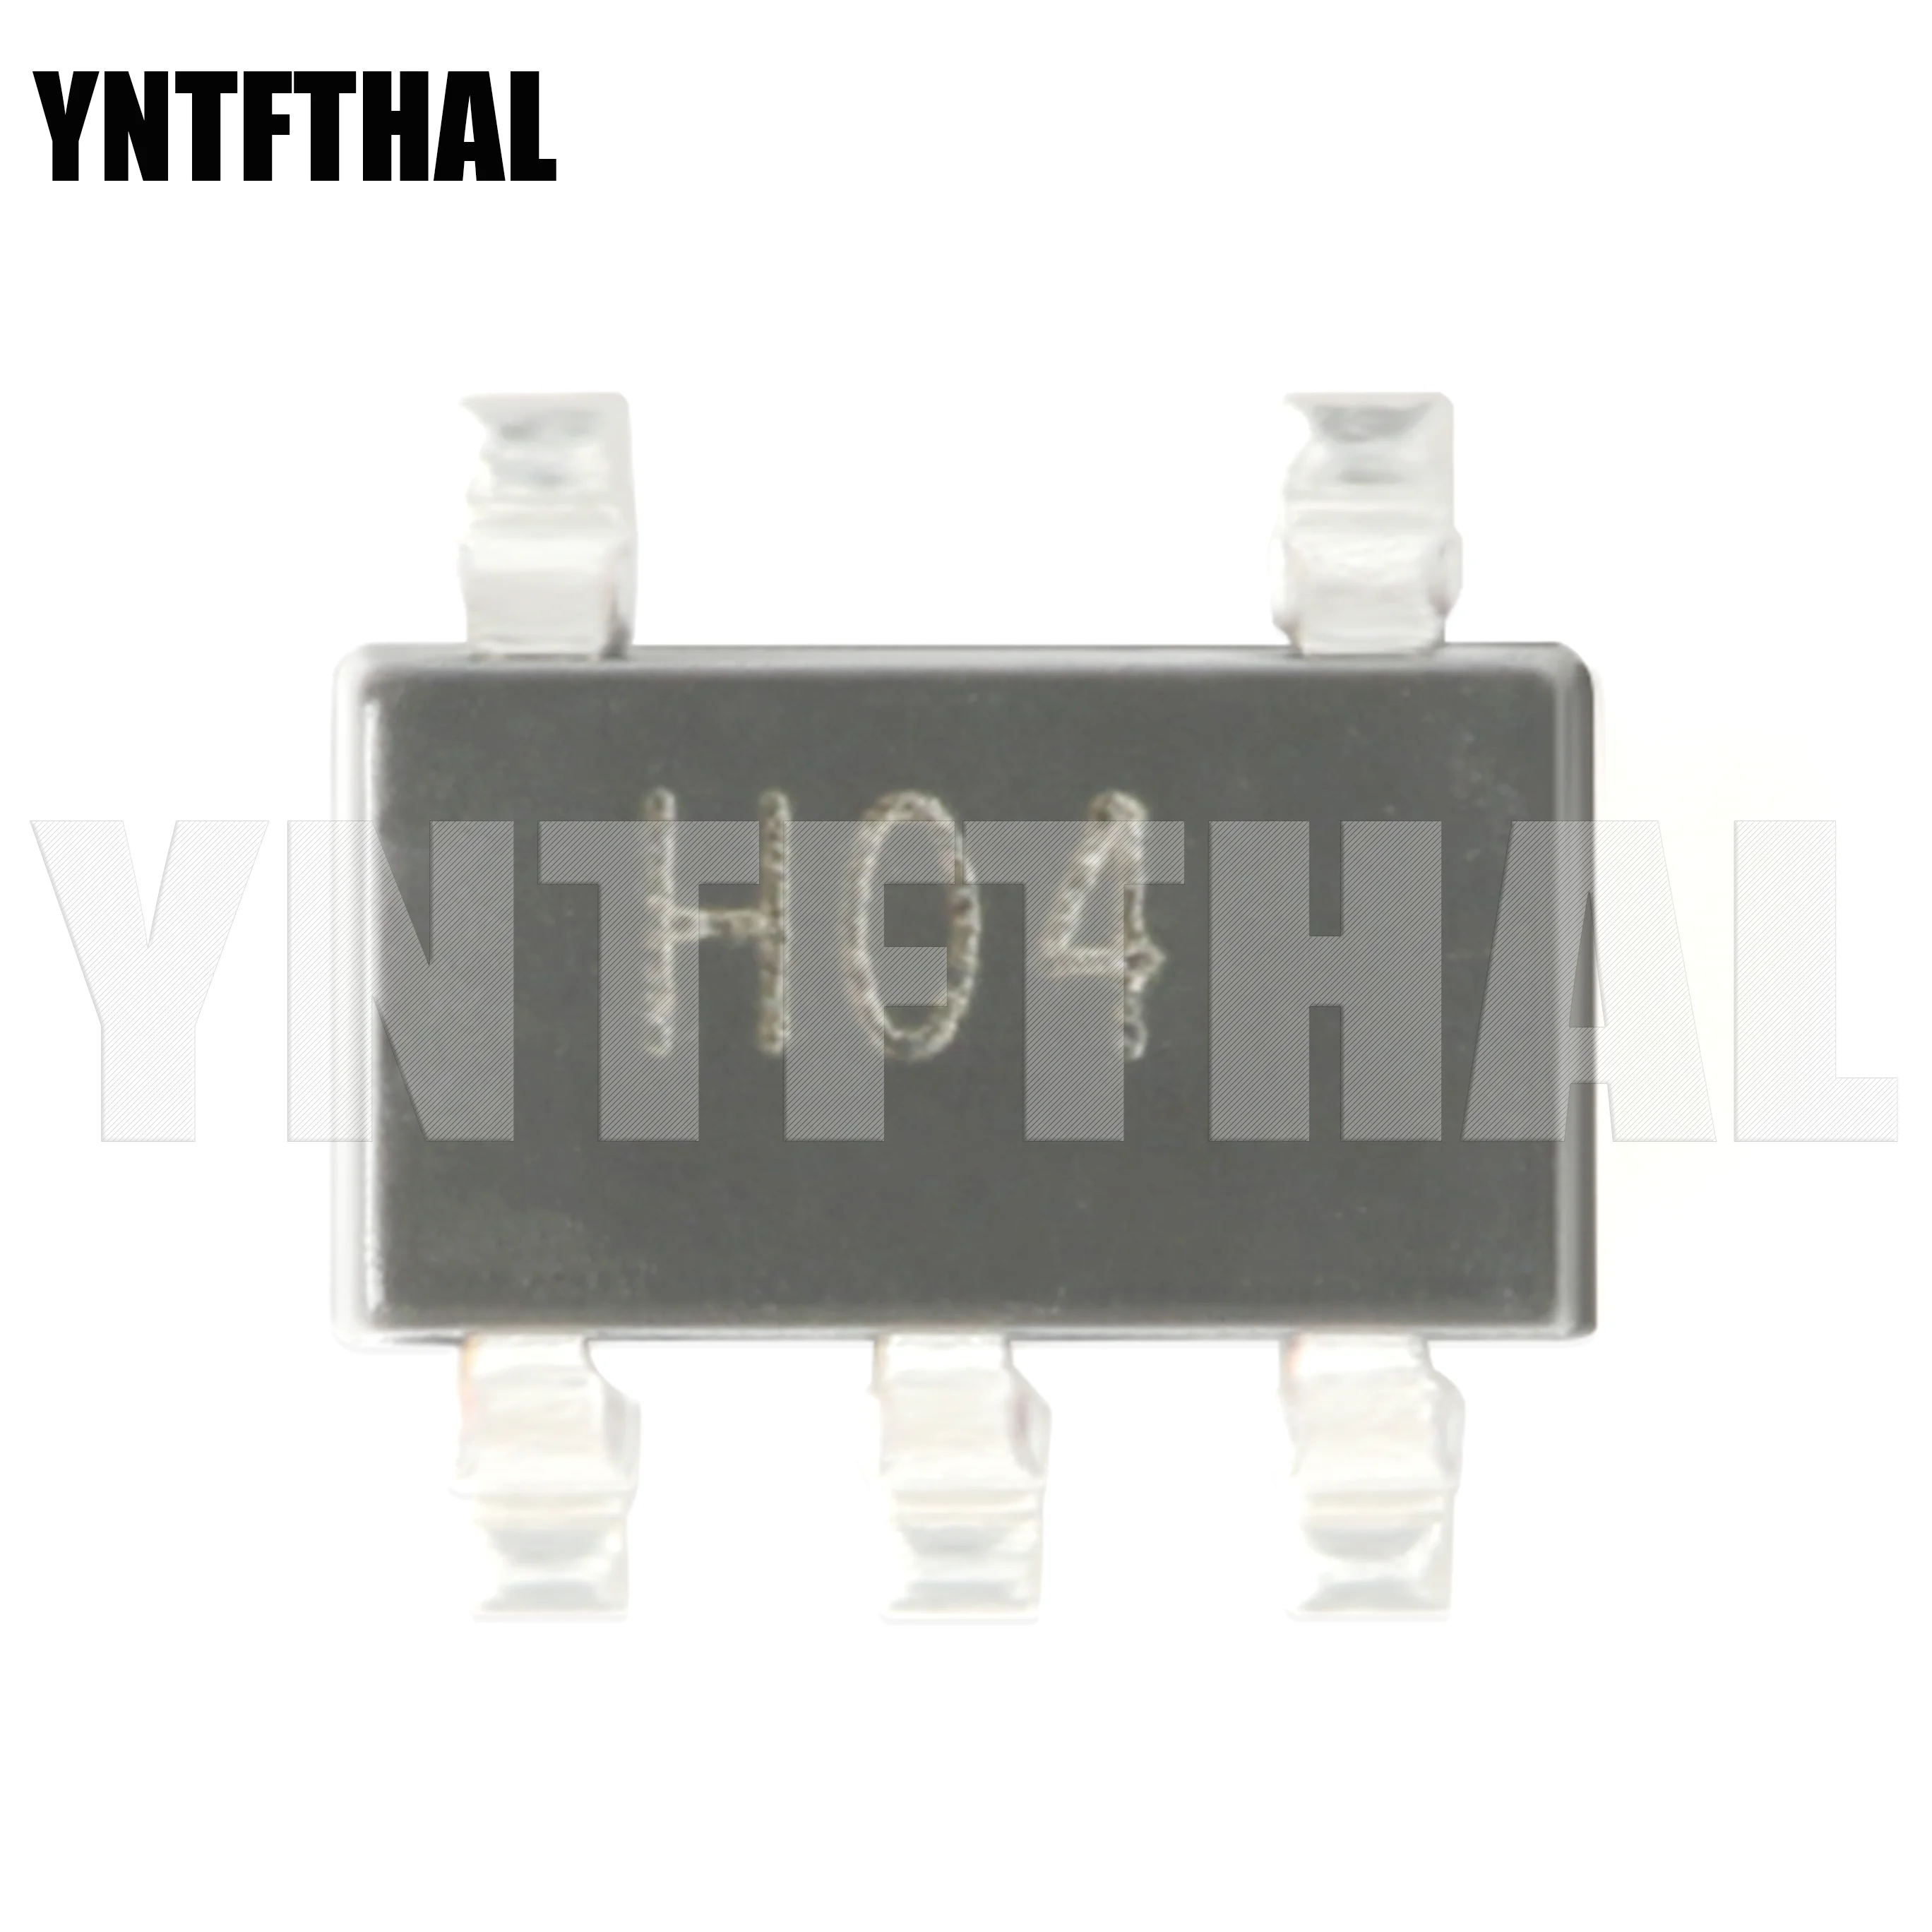 

10pcs New 100% Tested AD8031ARTZ-REEL7 SOT-23-5 80MHz Rail-to-Rail Amplifier IC Chip